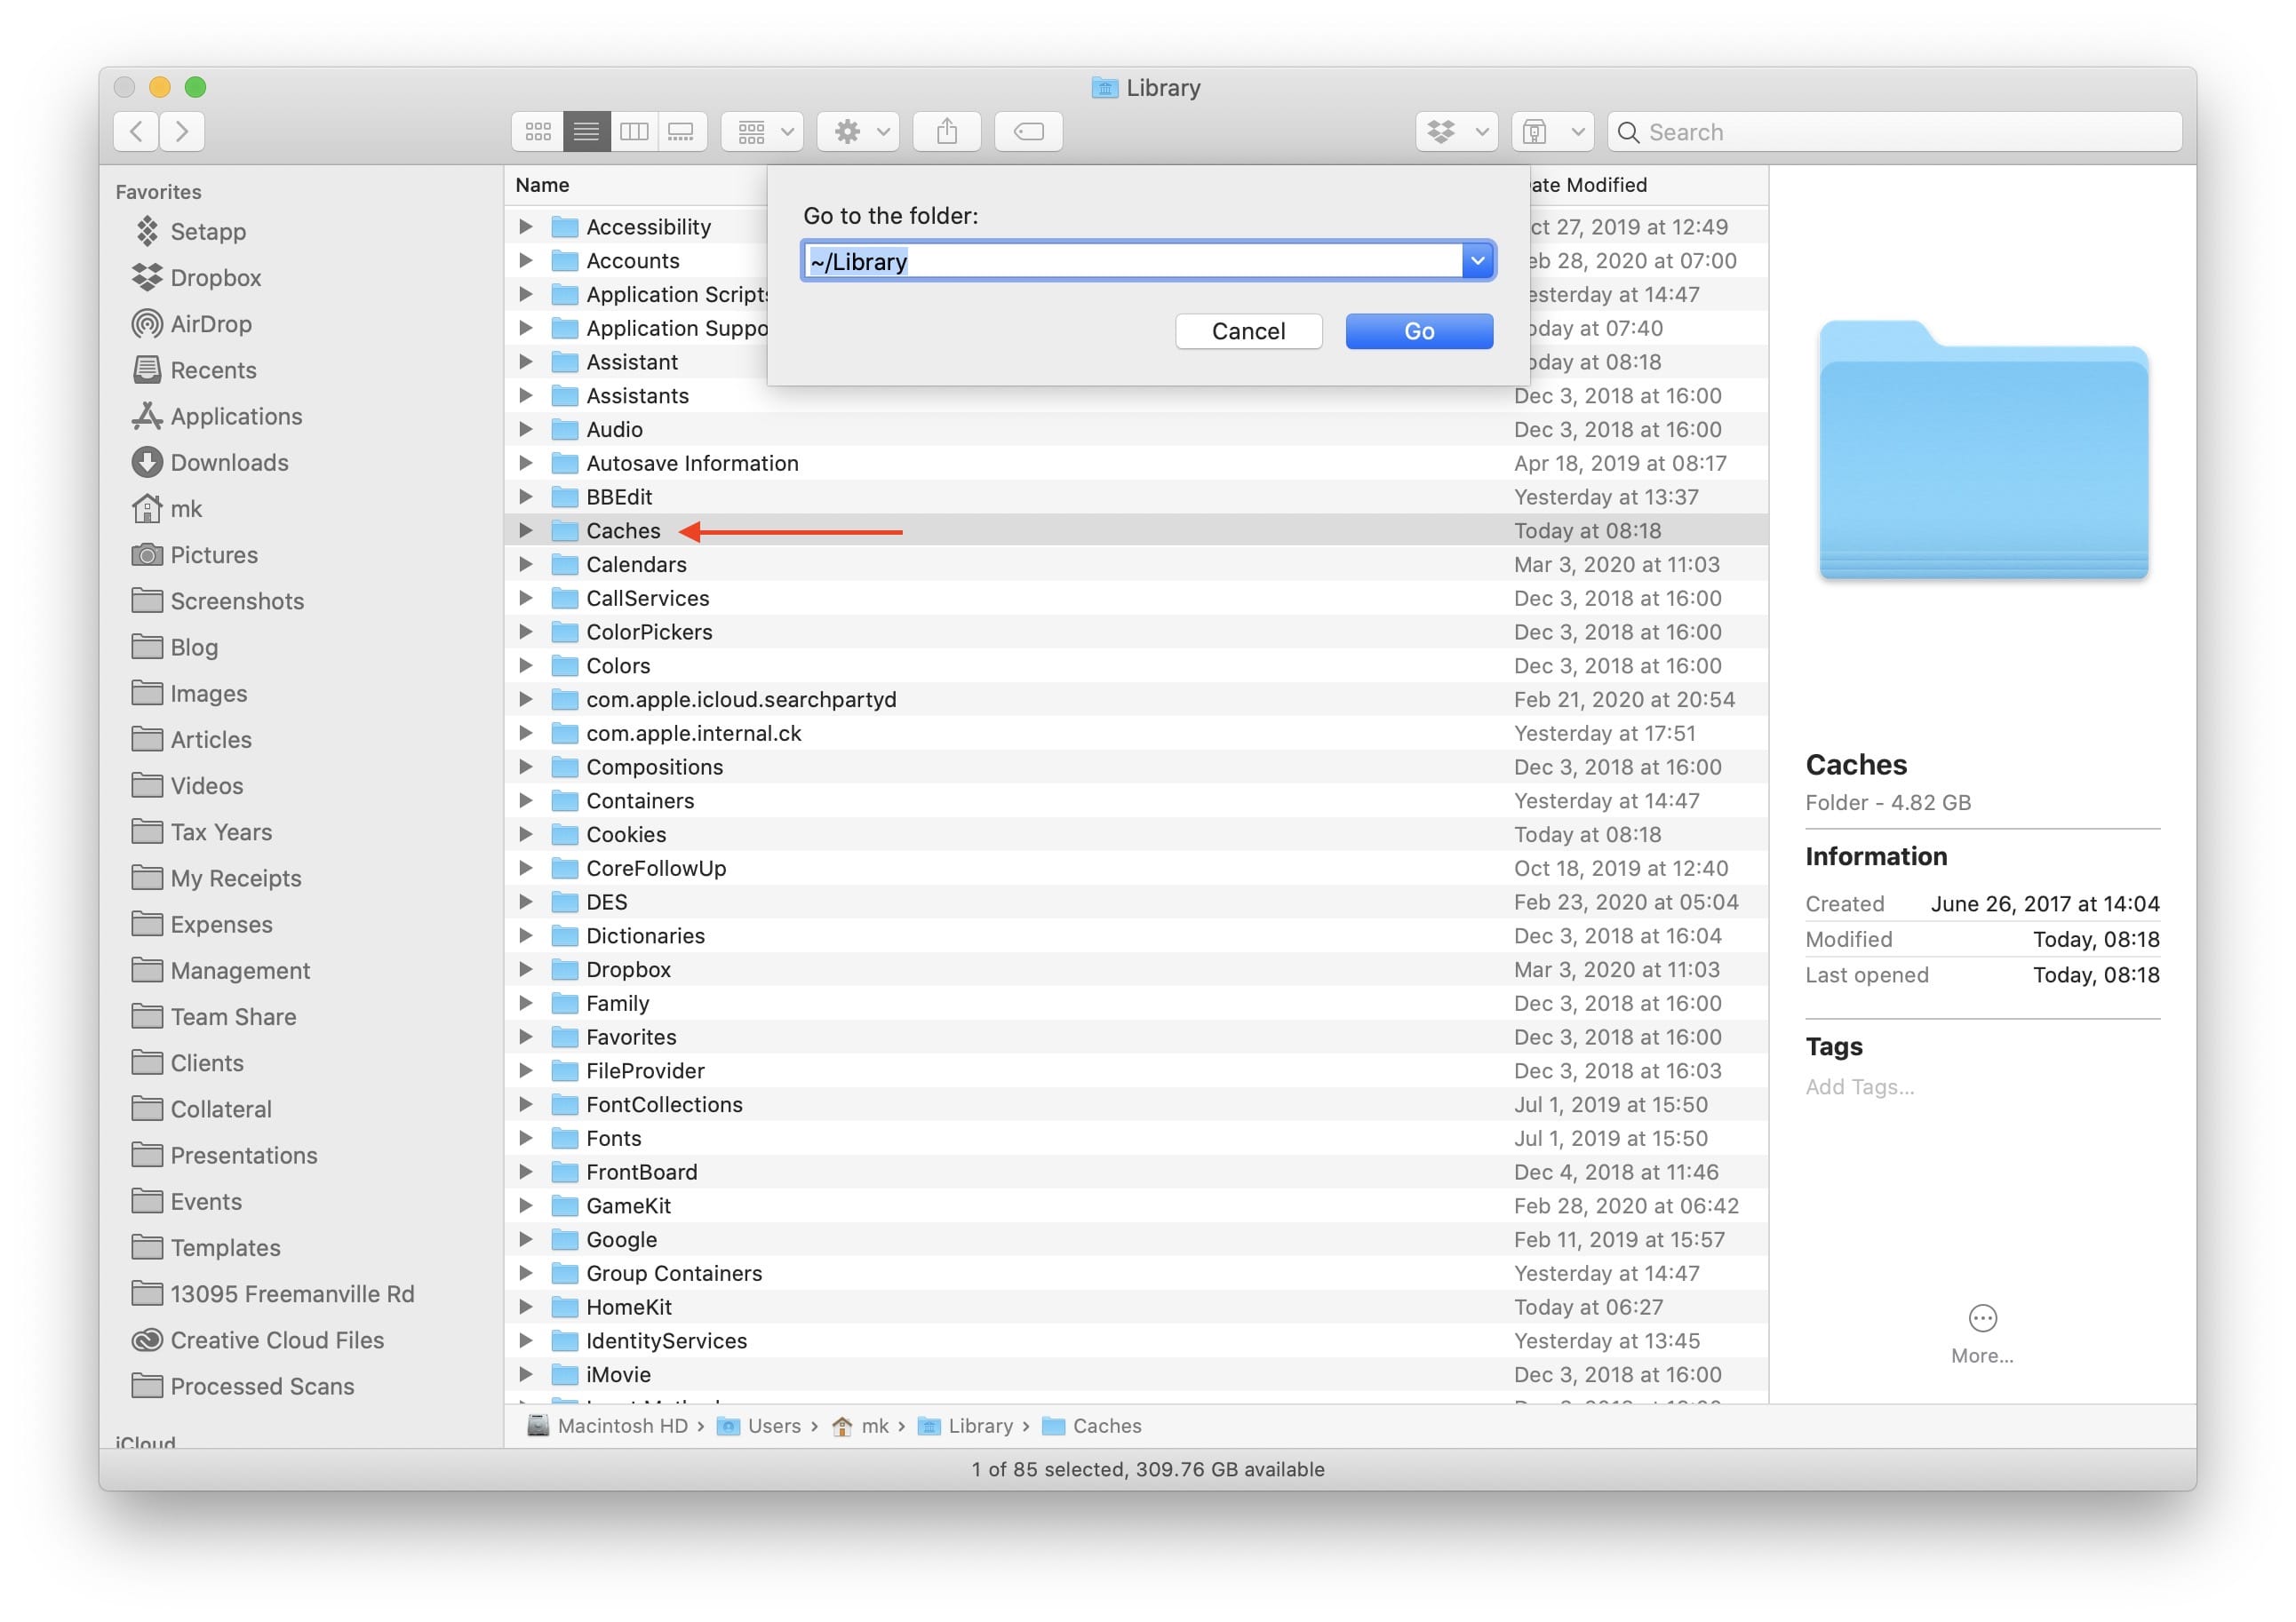 is is safe to delete cookies in my mac library folder